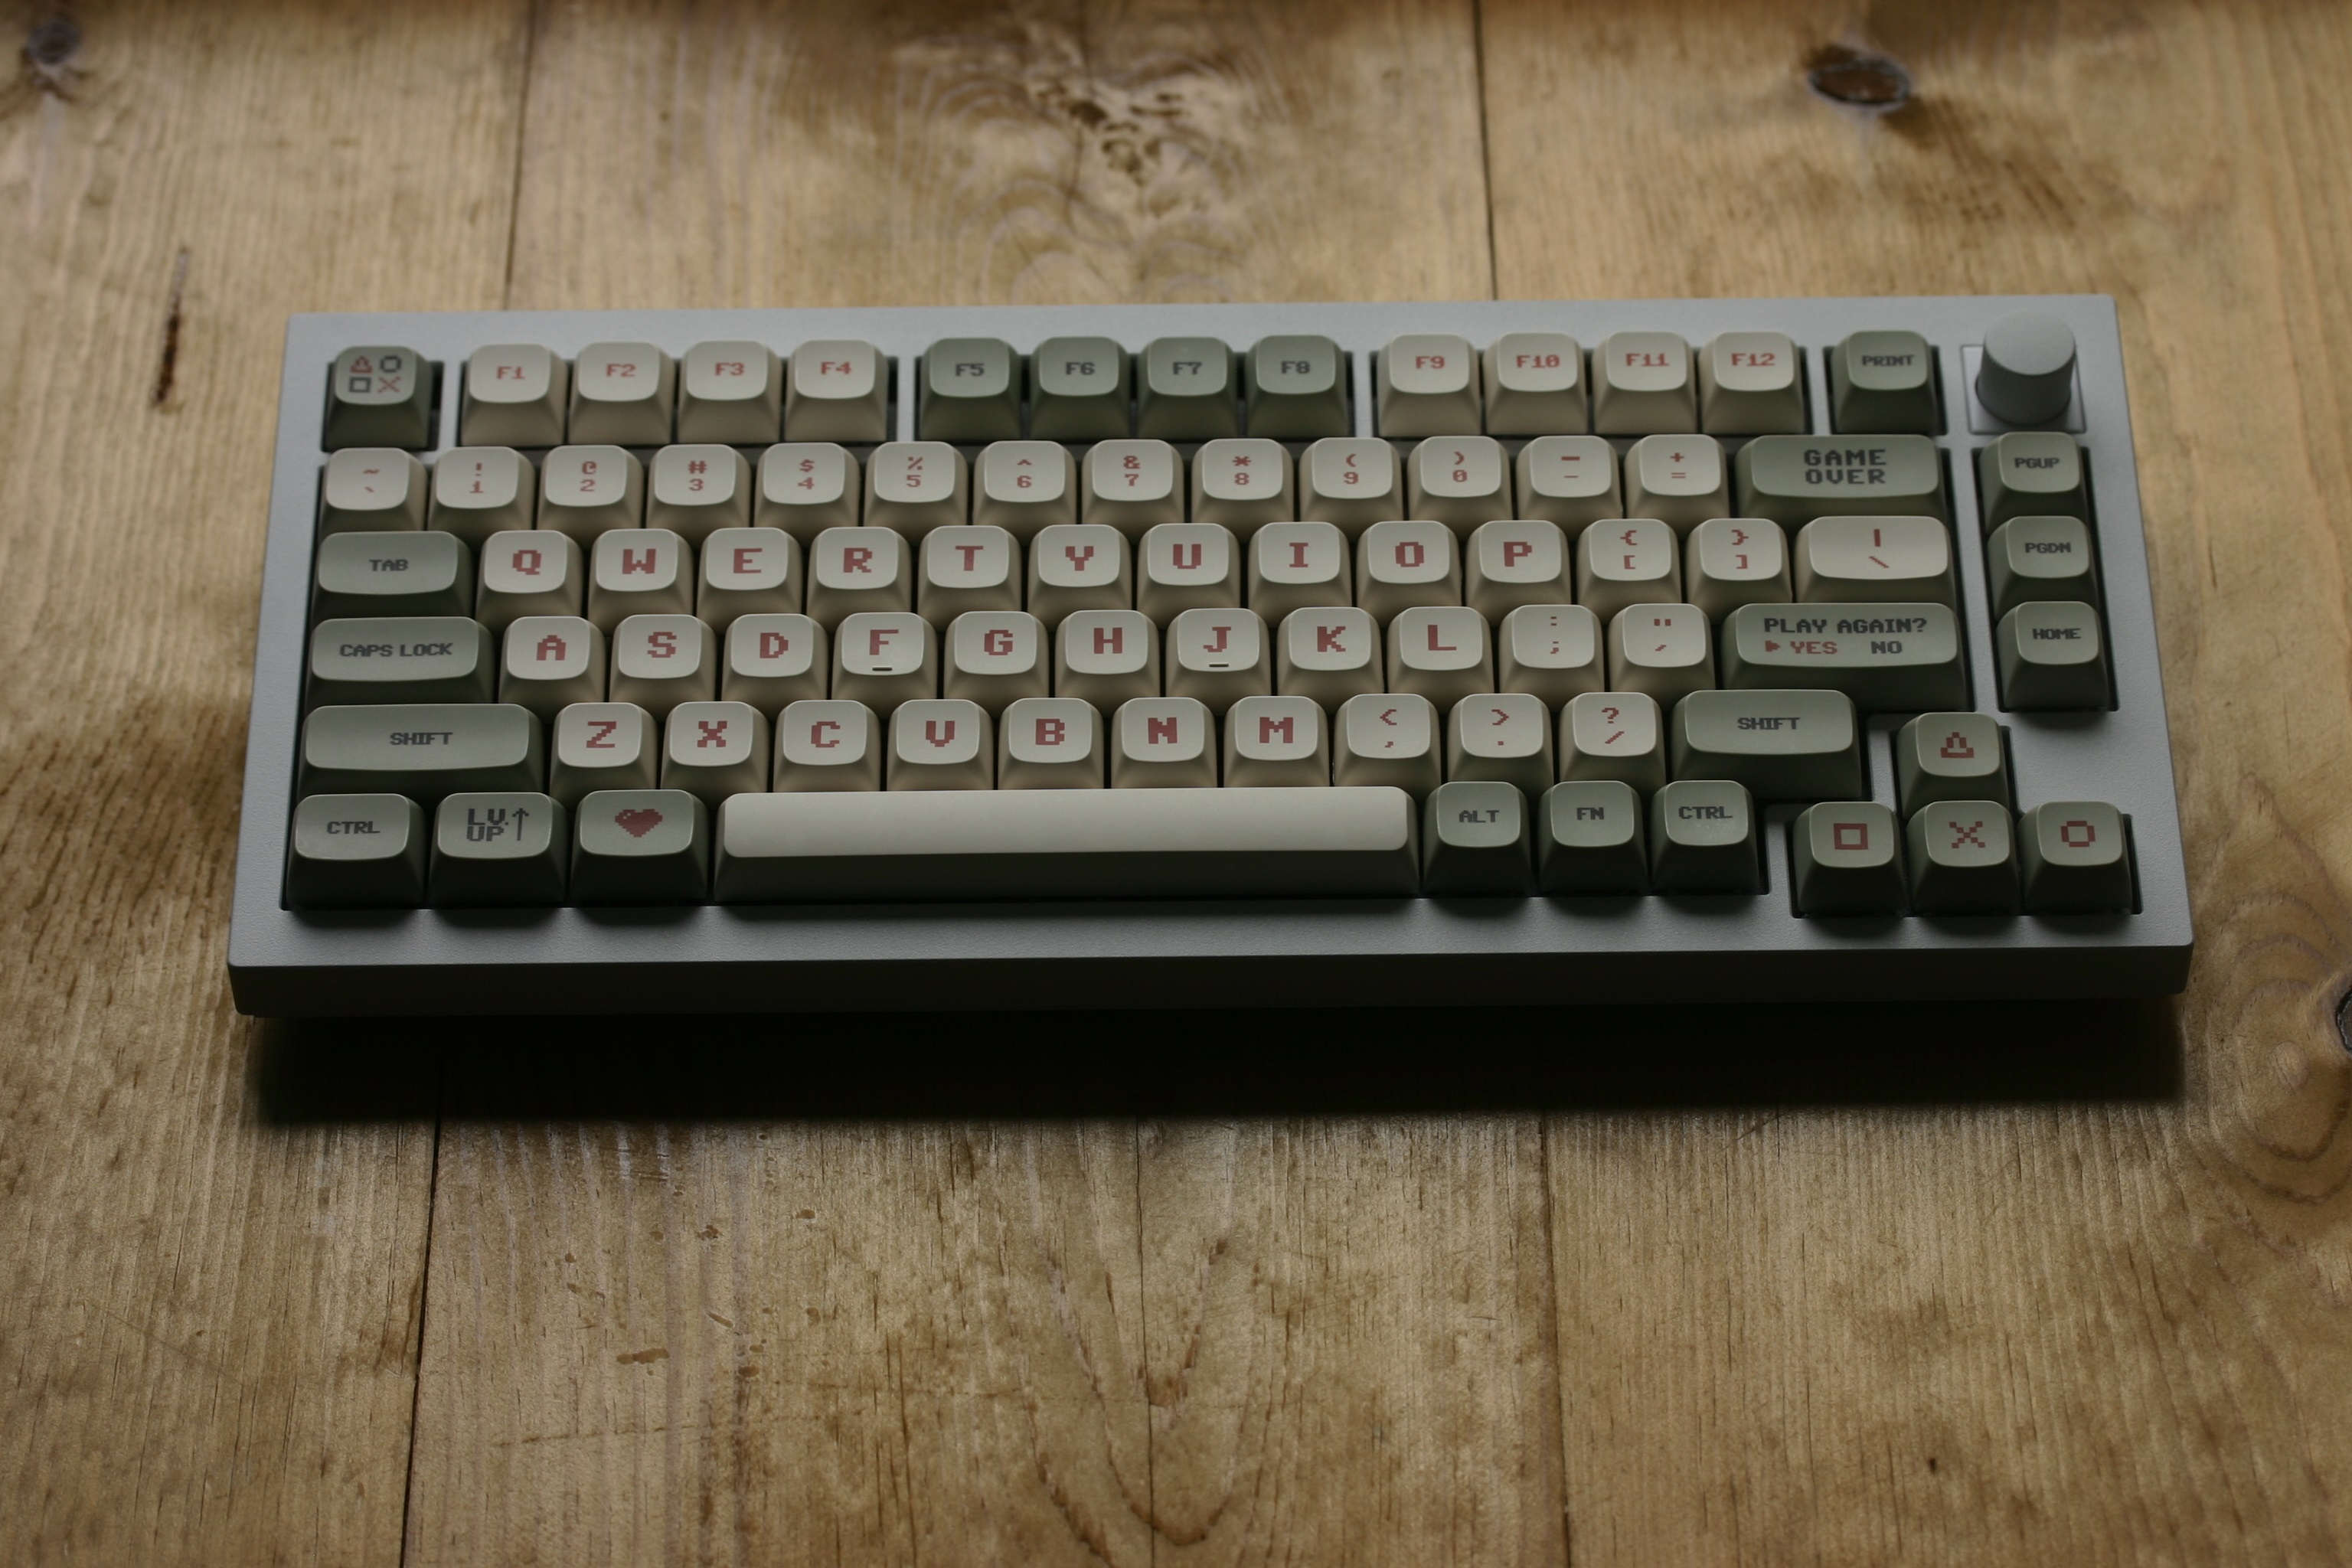 Small profile keyboard with retro-styled, beige and green keycaps